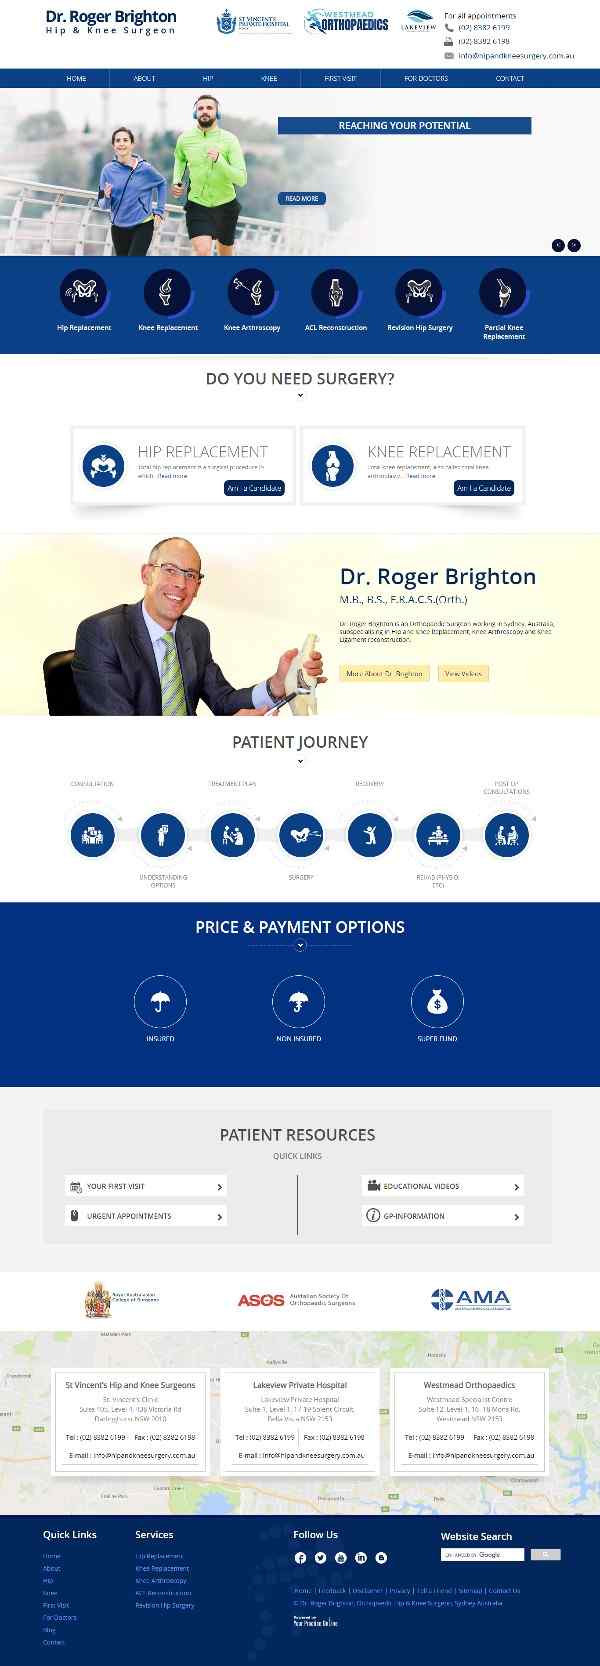 About Dr. Roger Brighton